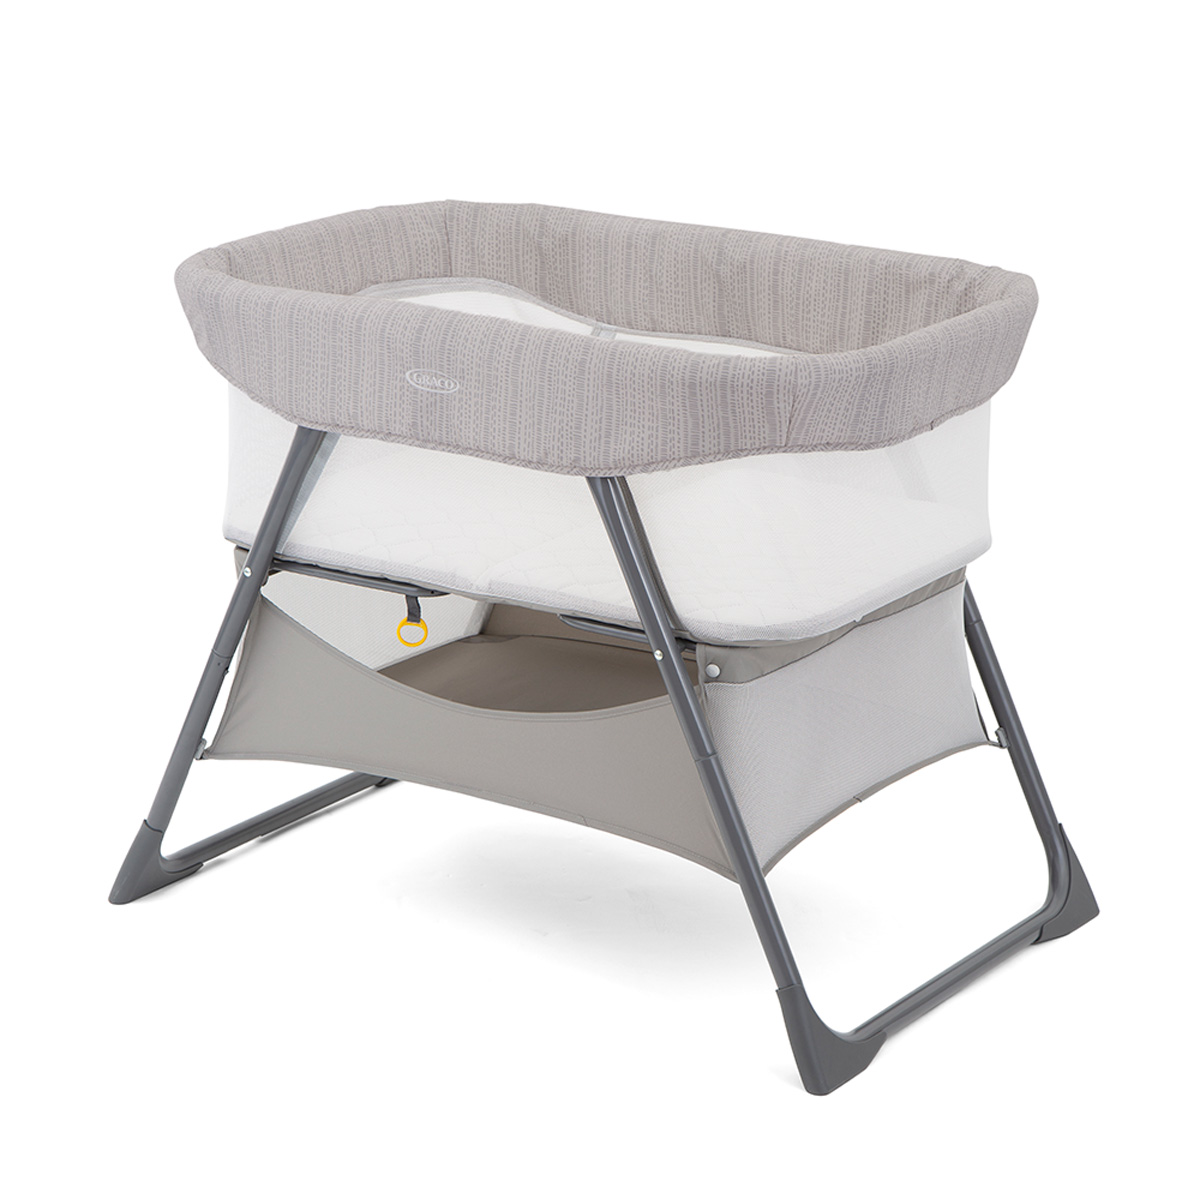 Graco Side-By-Side Bedside Bassinet three-quarter angle on white background.